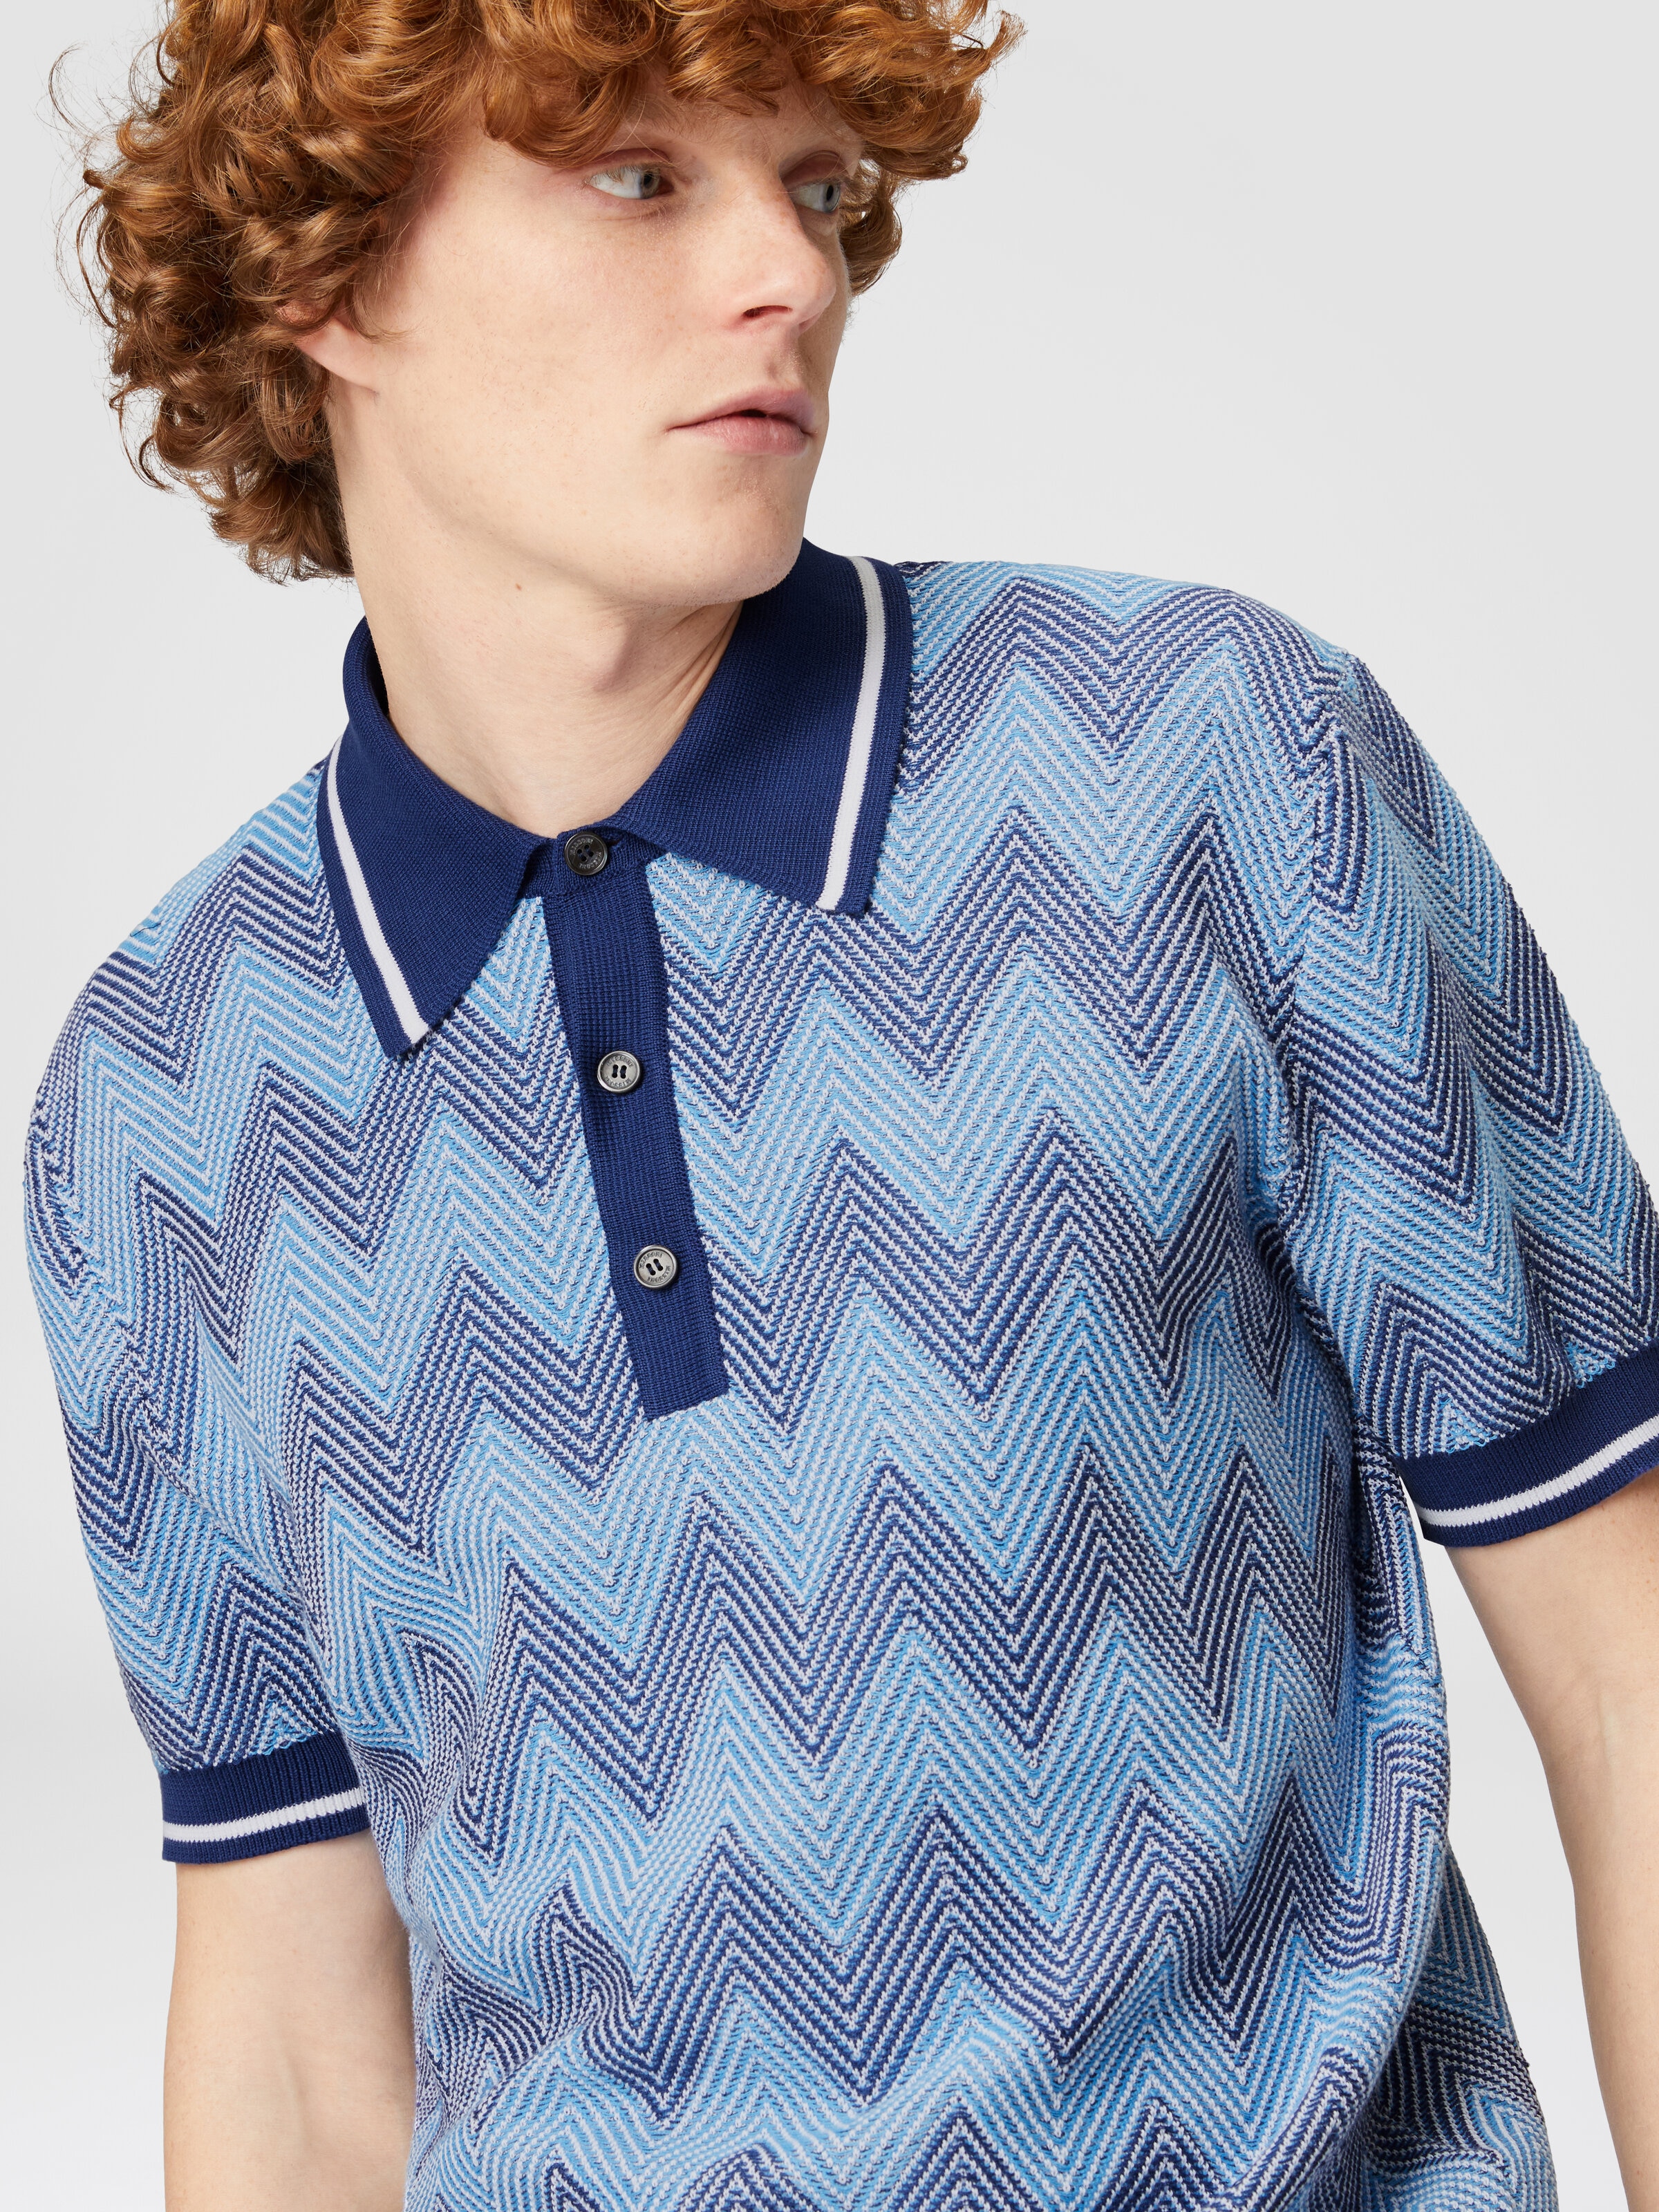 Short-sleeved polo shirt in zigzag cotton with contrasting trim, Blue - 4